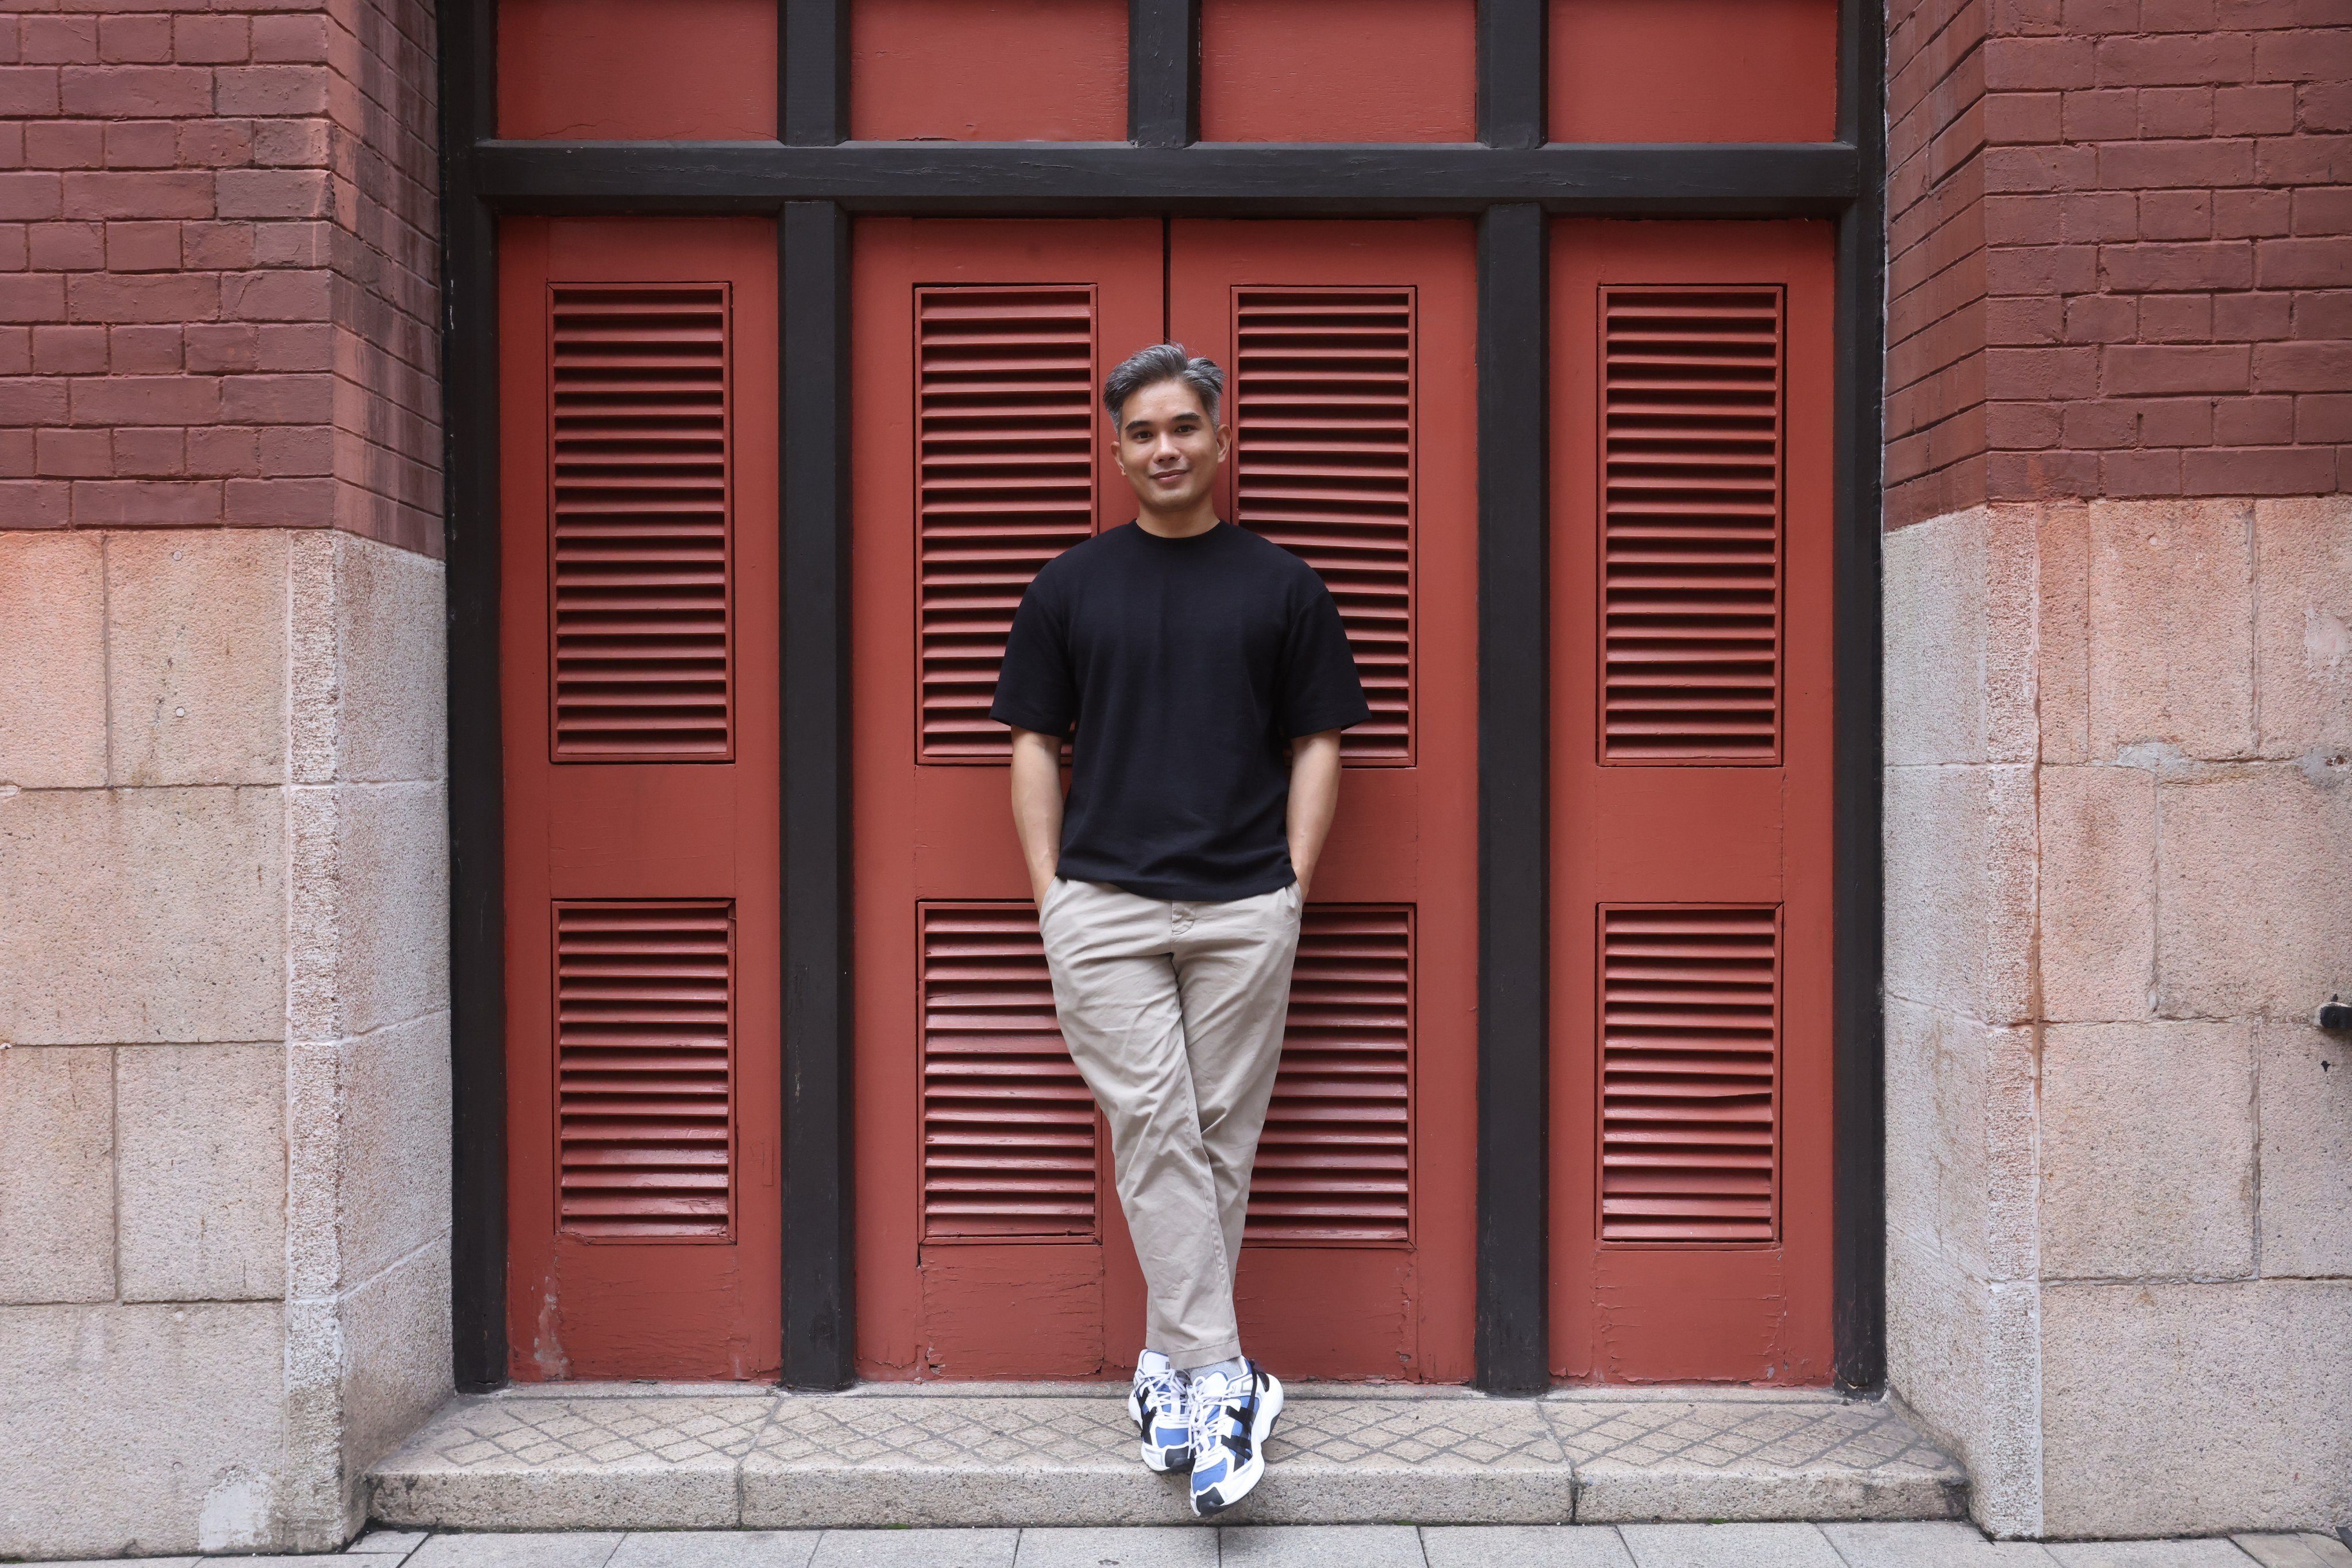 Videographer Jazzie Sillona is known for his cinematic videos of Hong Kong on Instagram. Photo: Jonathan Wong